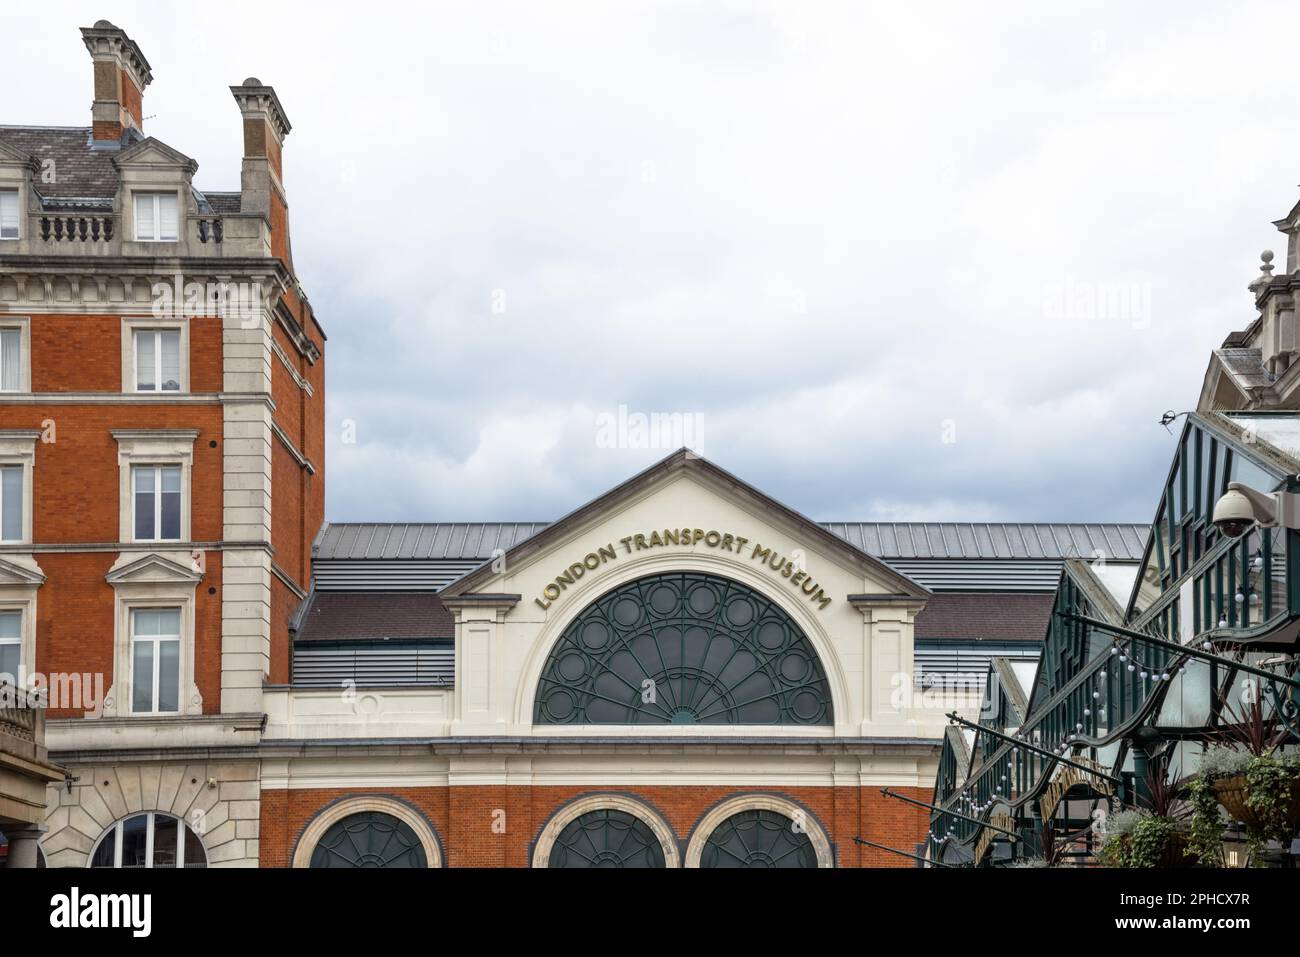 Sign above an arched window of the London Transport Museum, Covent Garden, London, UK Stock Photo